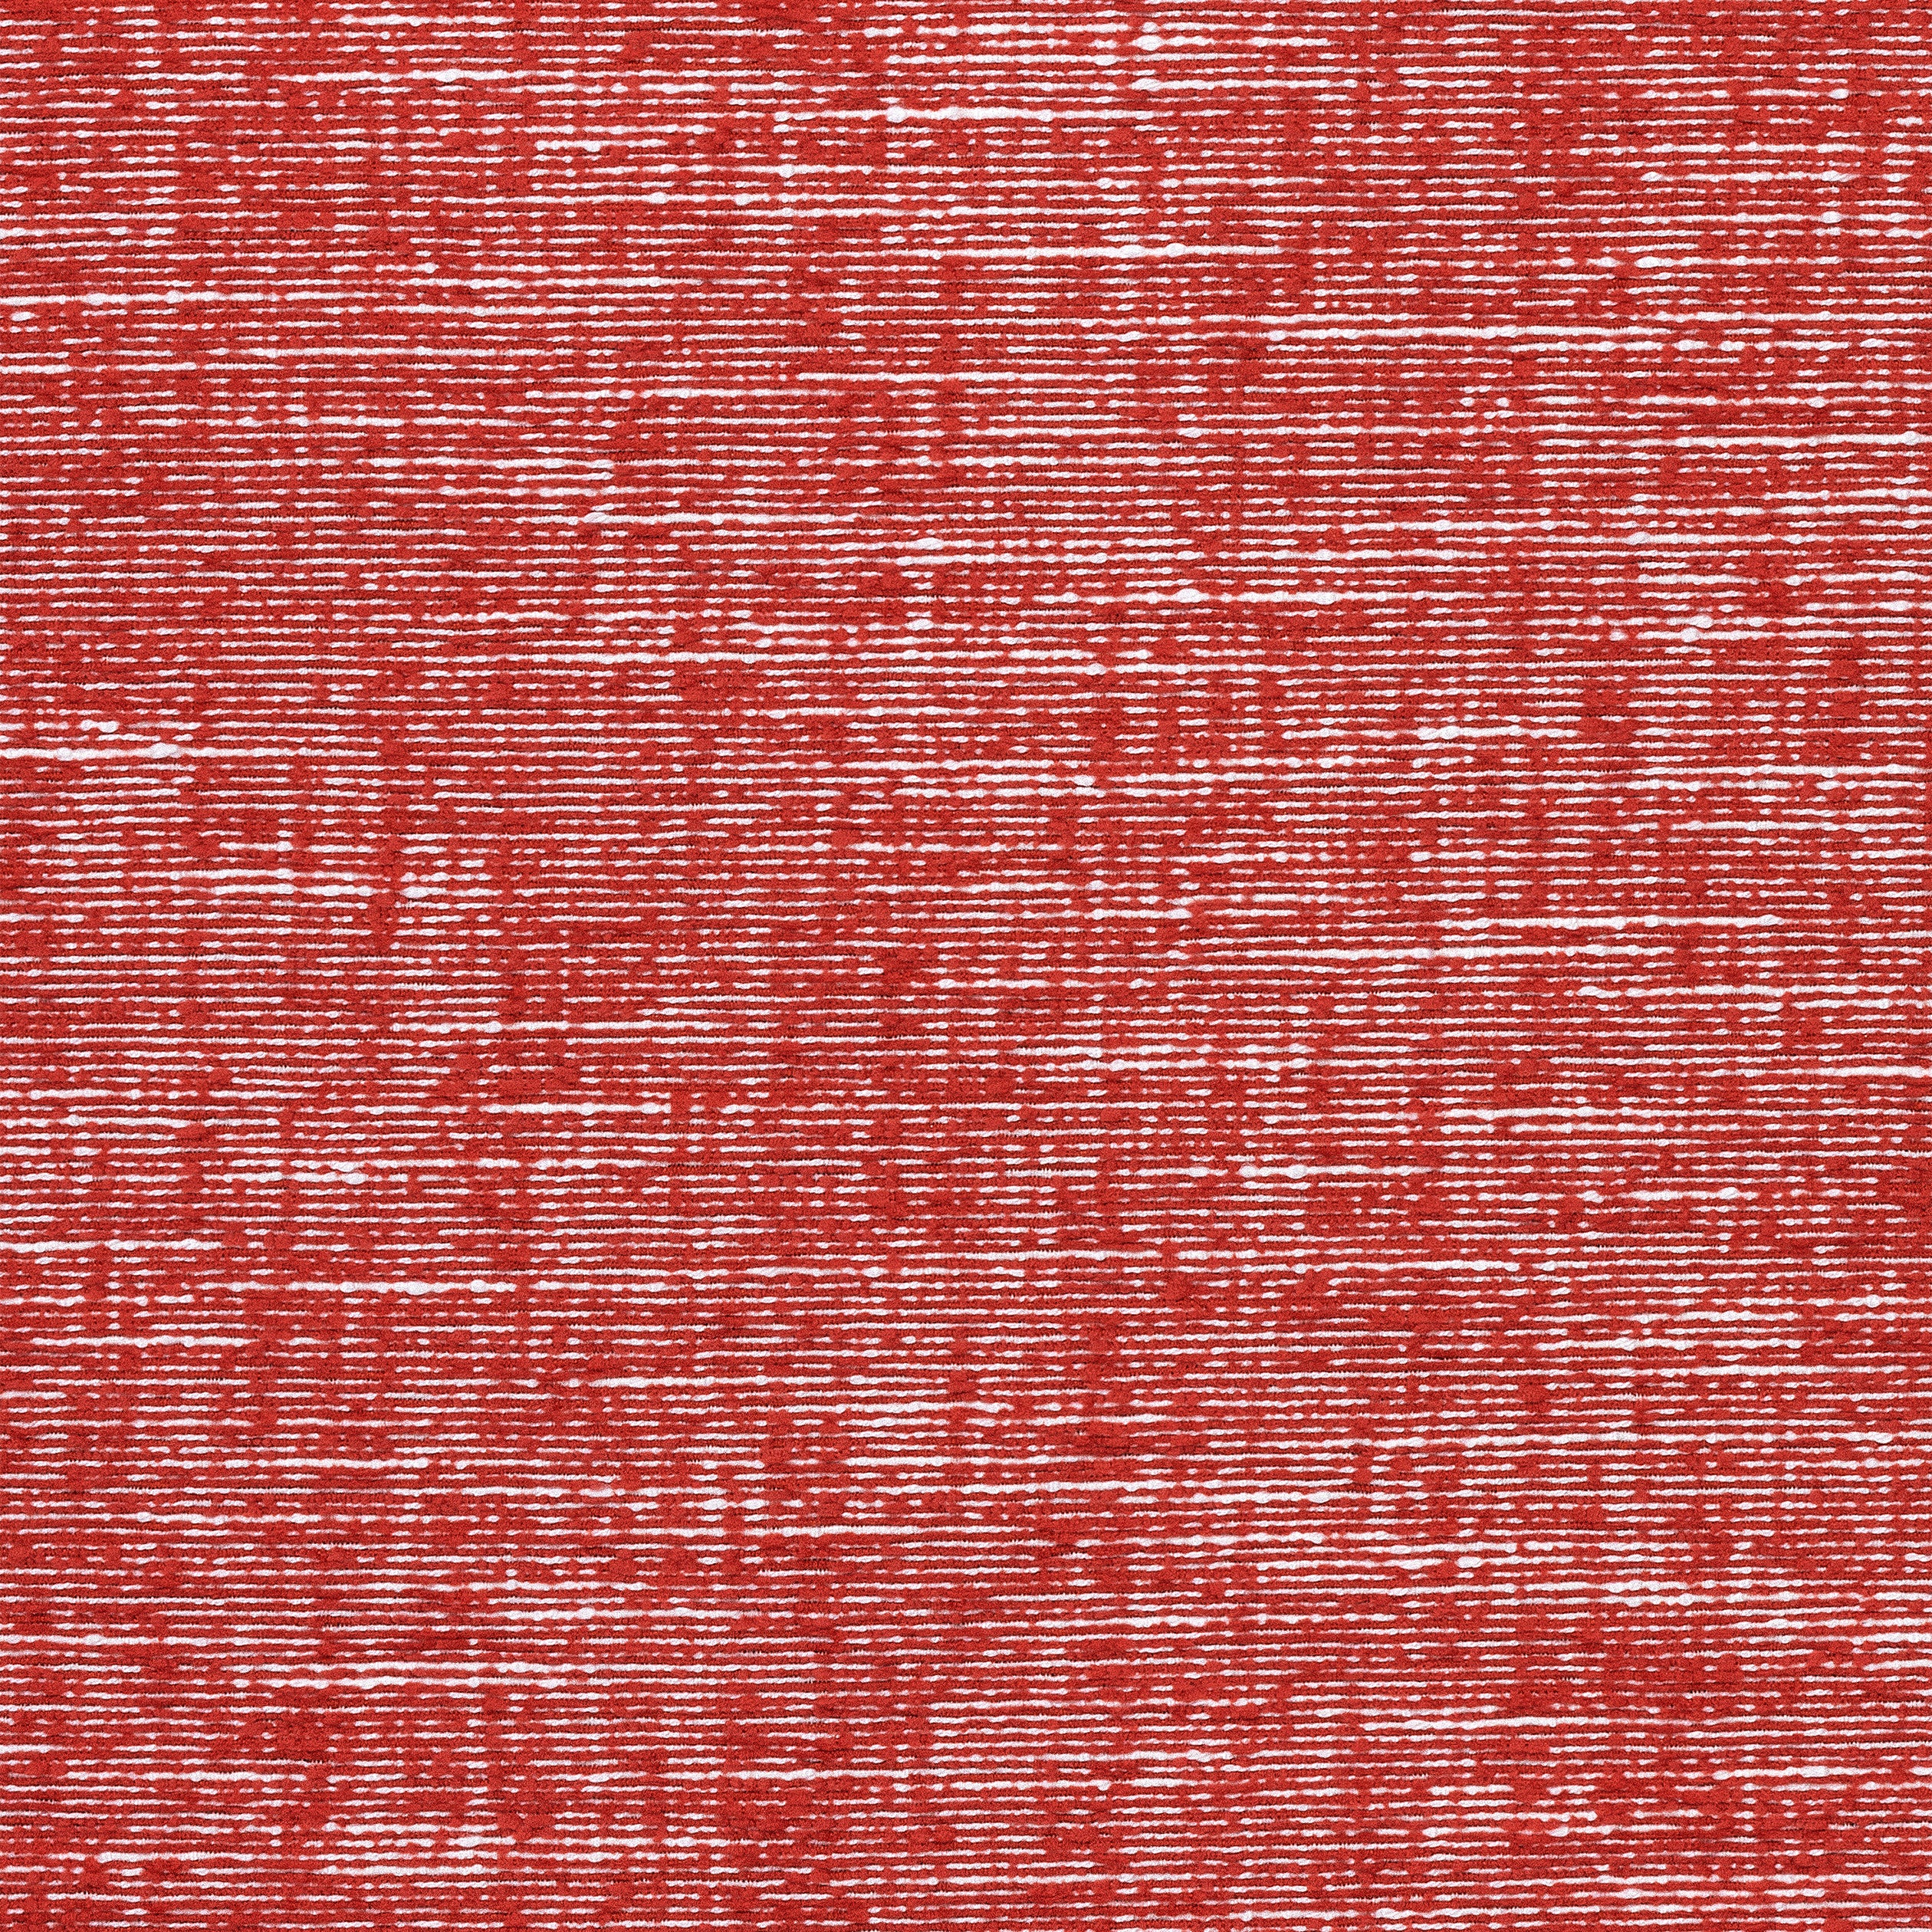 Freeport fabric in cranberry color - pattern number W74604 - by Thibaut in the Festival collection